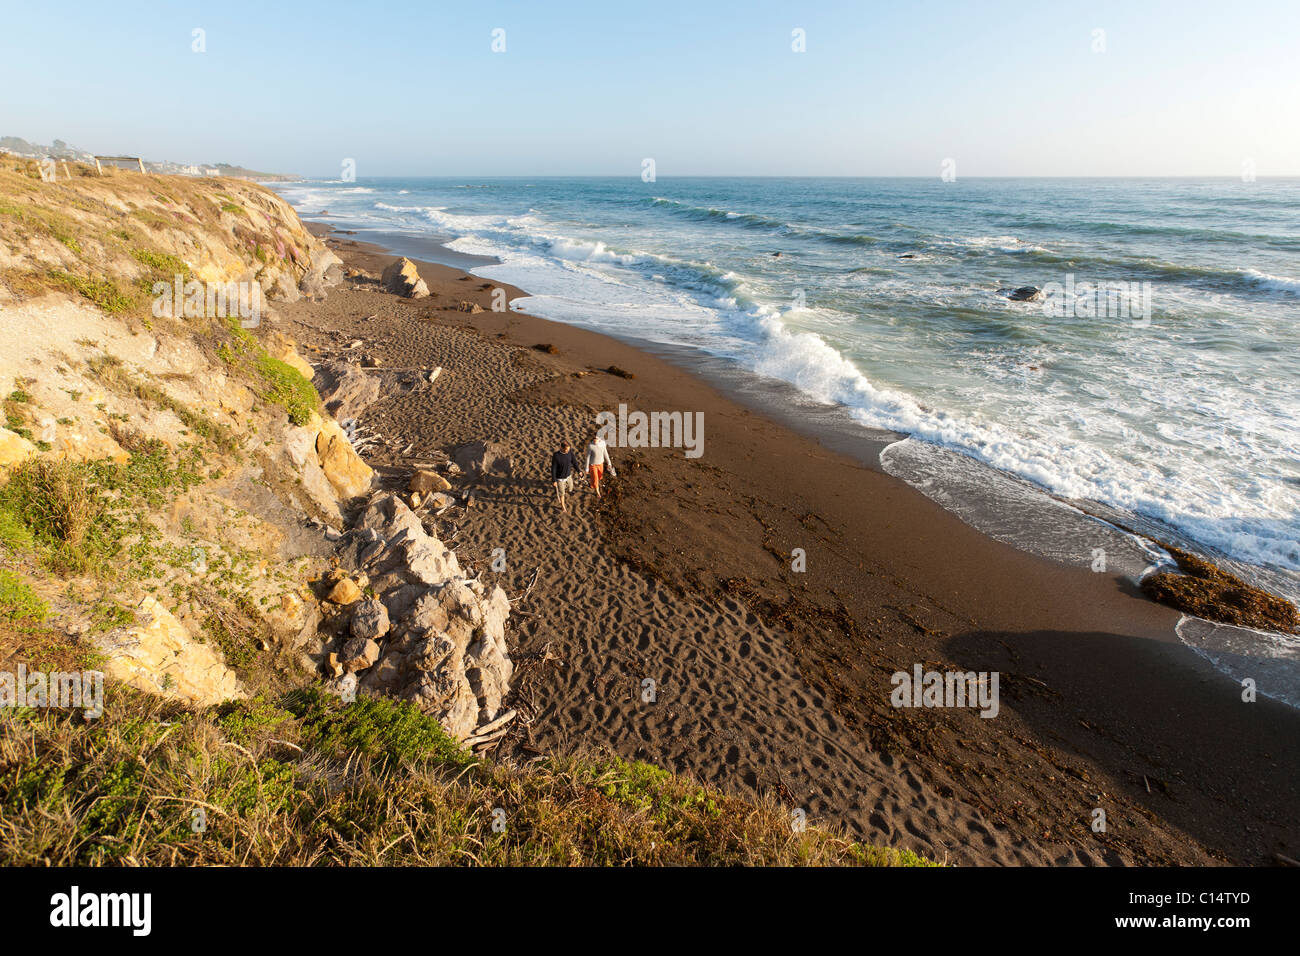 Couple walking on sandy beach overlooking Pacific Ocean at Moonstone Beach in Cambria, California. Stock Photo